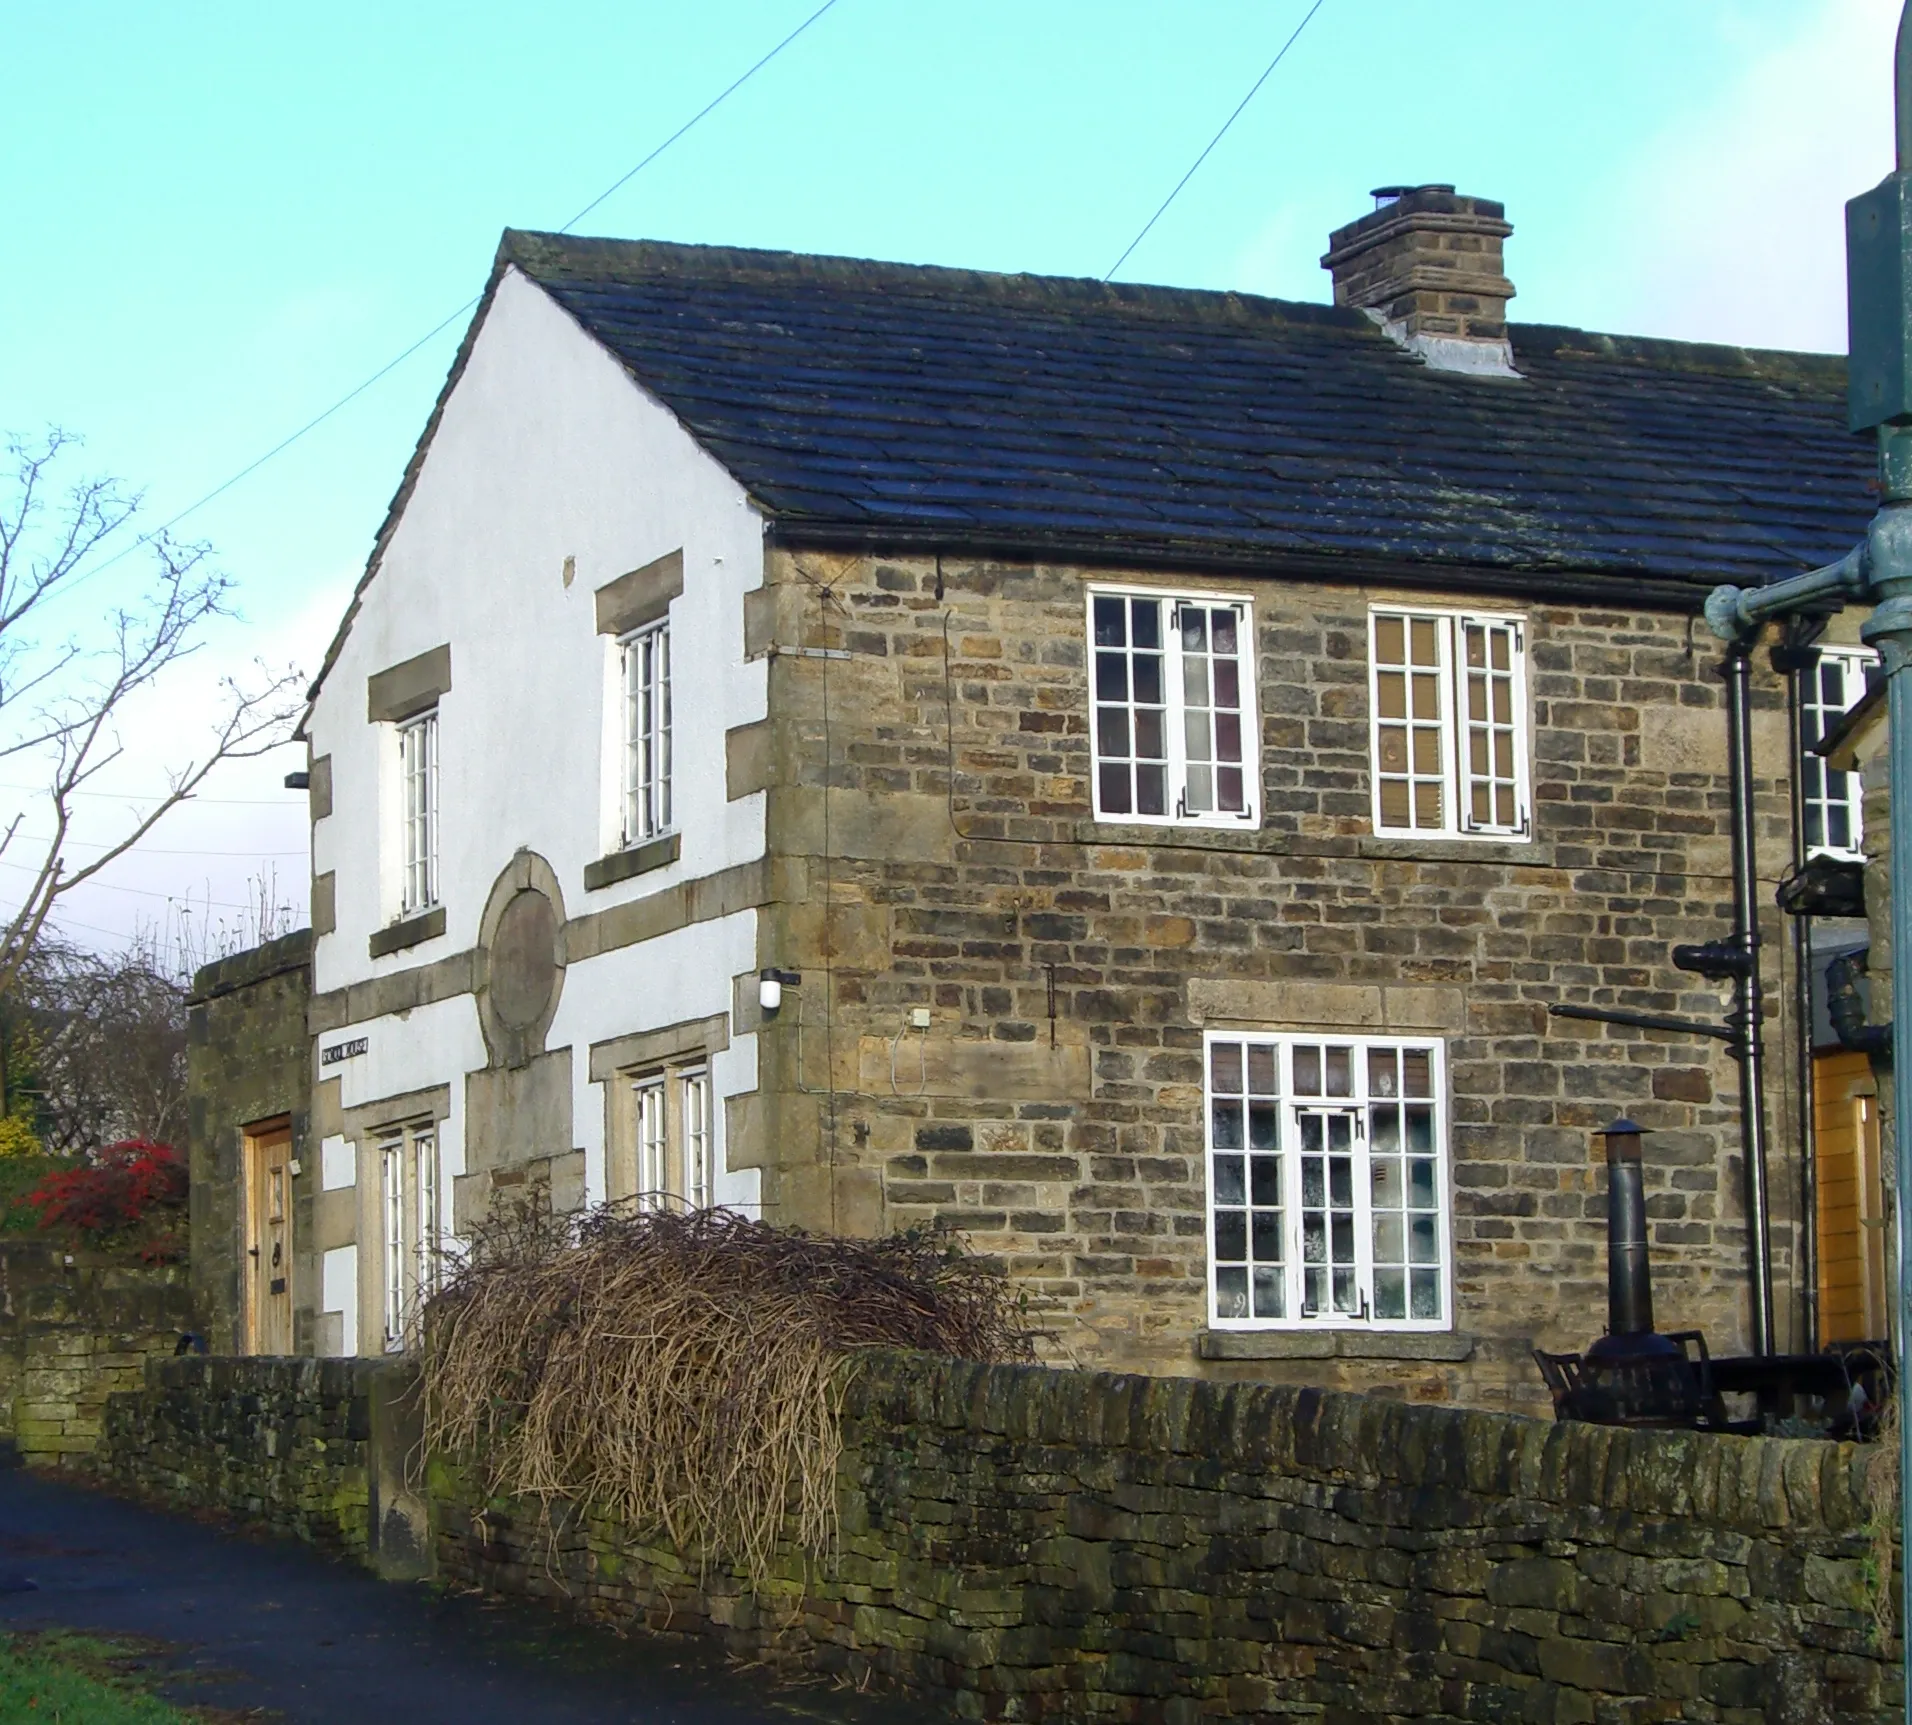 Photo showing: The Old School House on School Green Lane in Fulwood, Sheffield, England. This Grade II Listed Building dates from 1736. It is now use as a private dwelling.